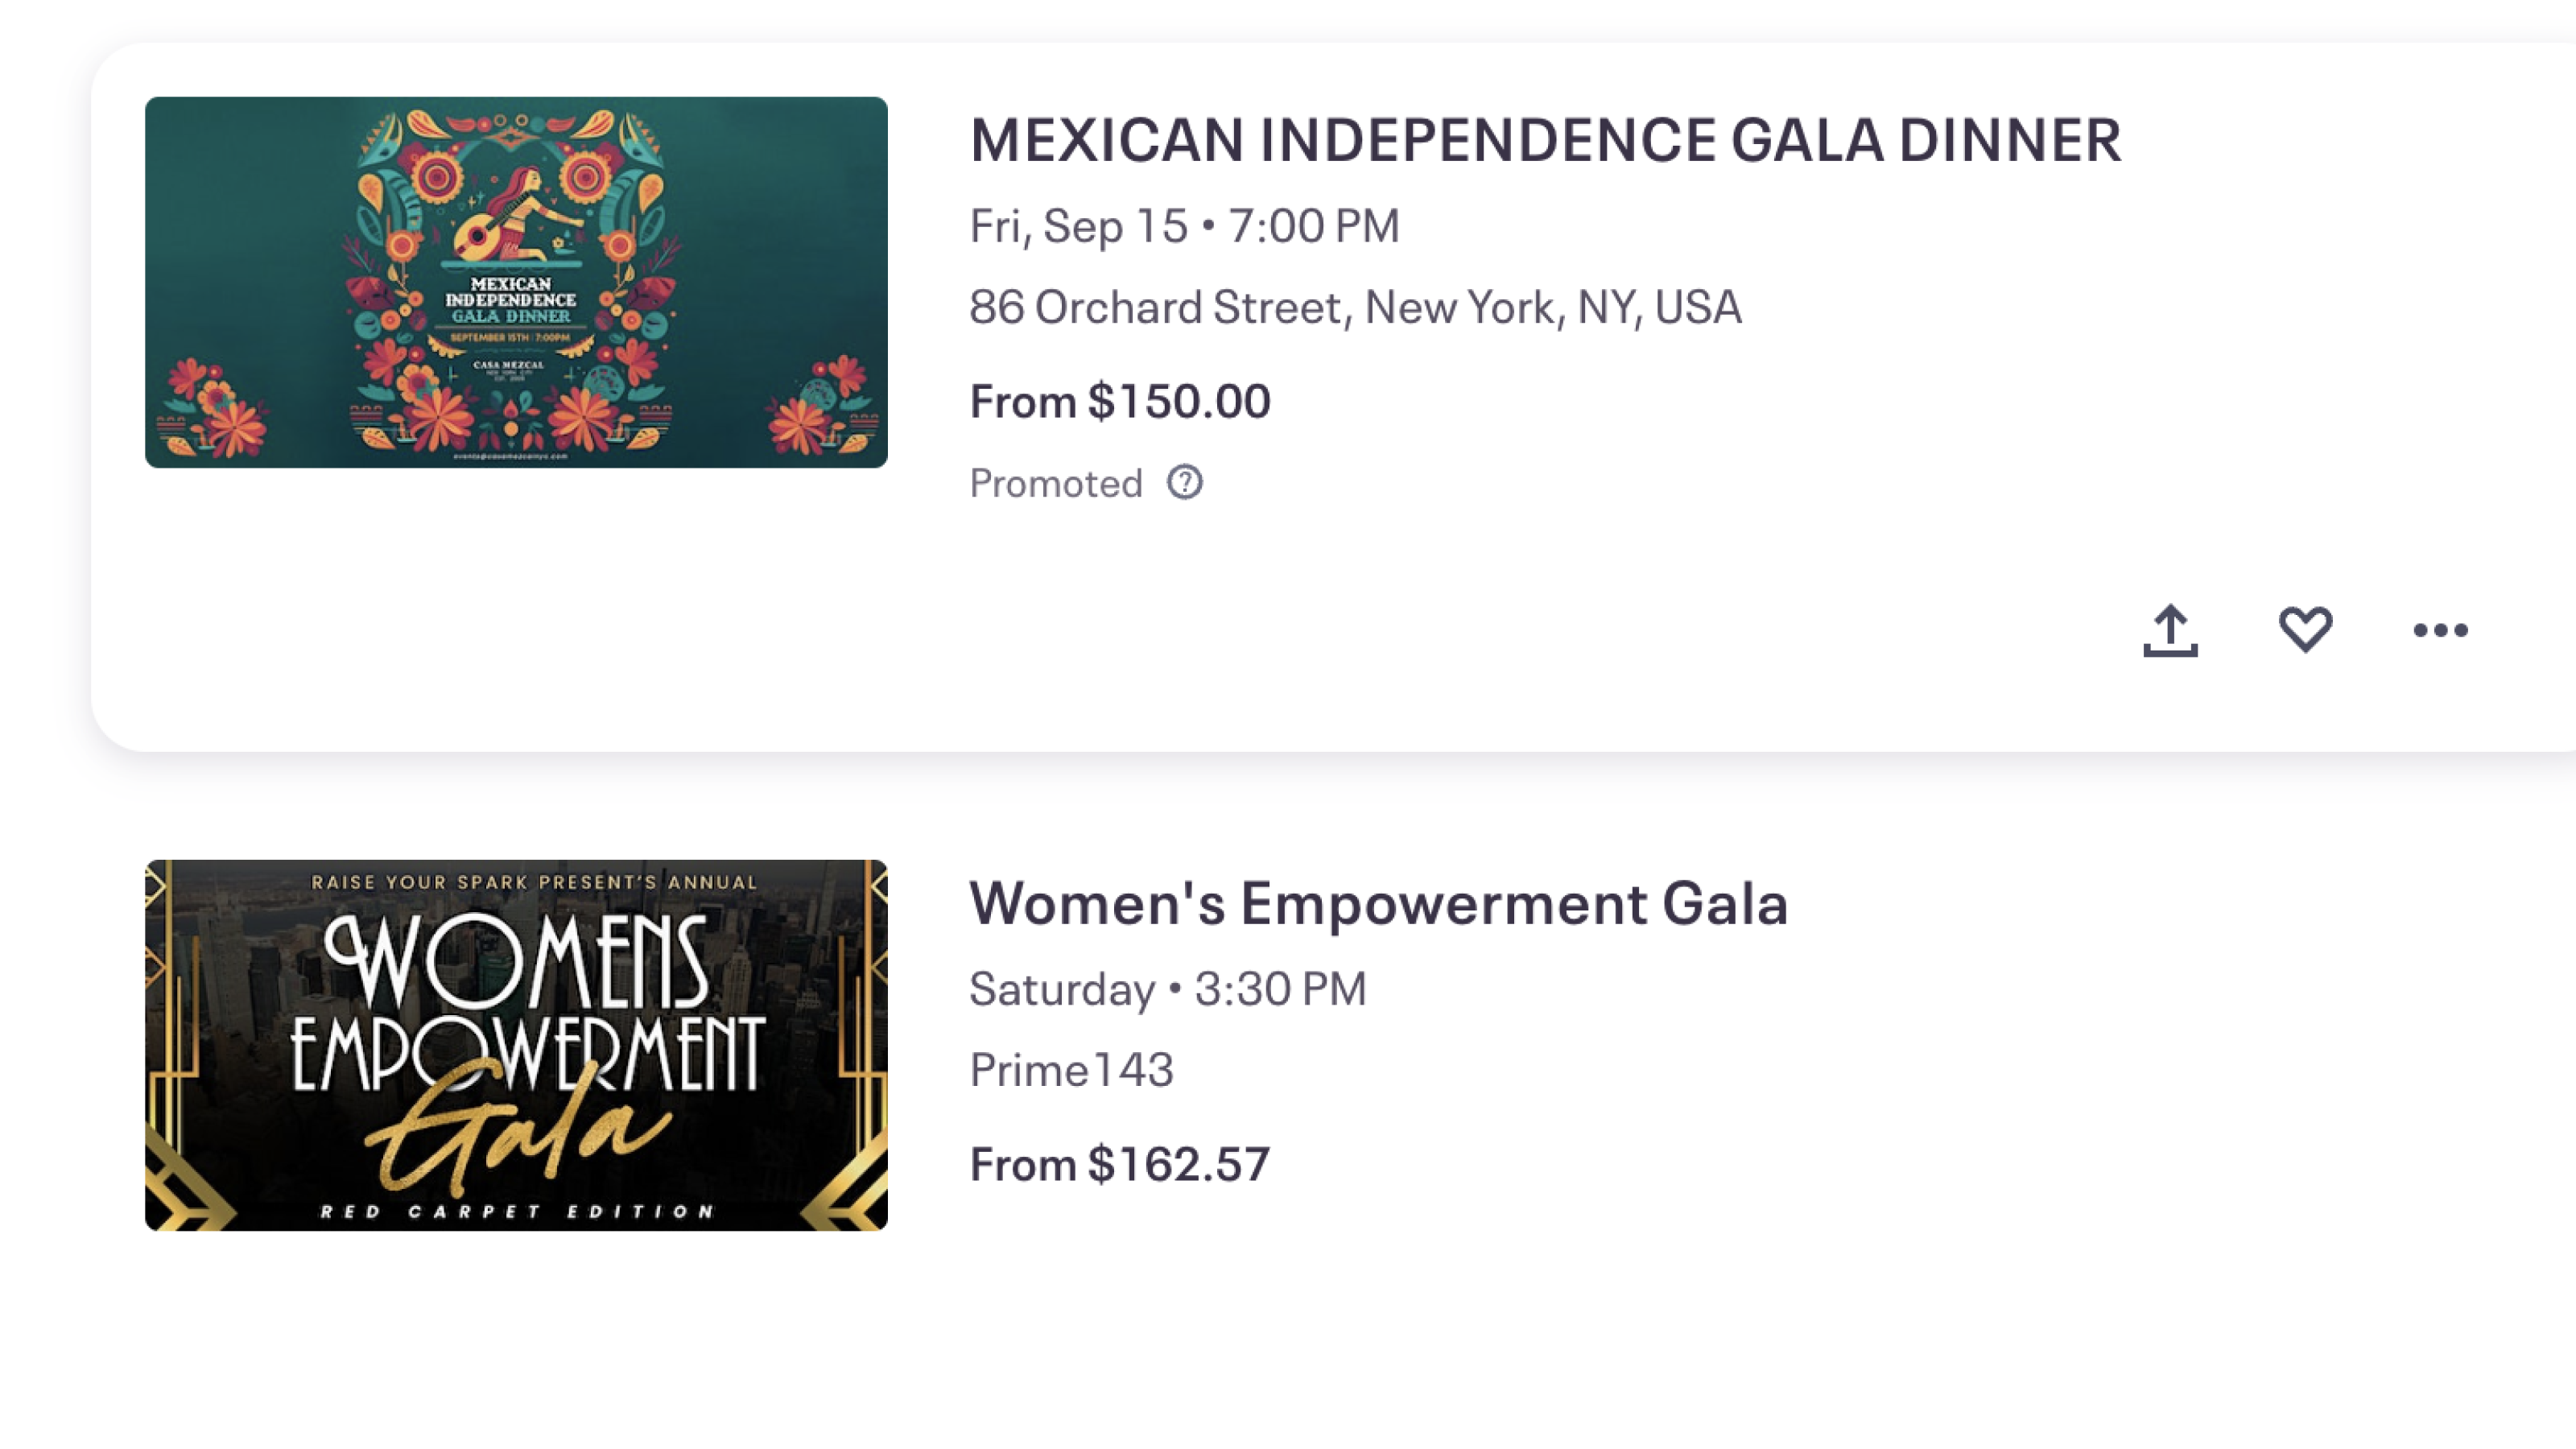 A screenshot of upcoming events on Eventbrite